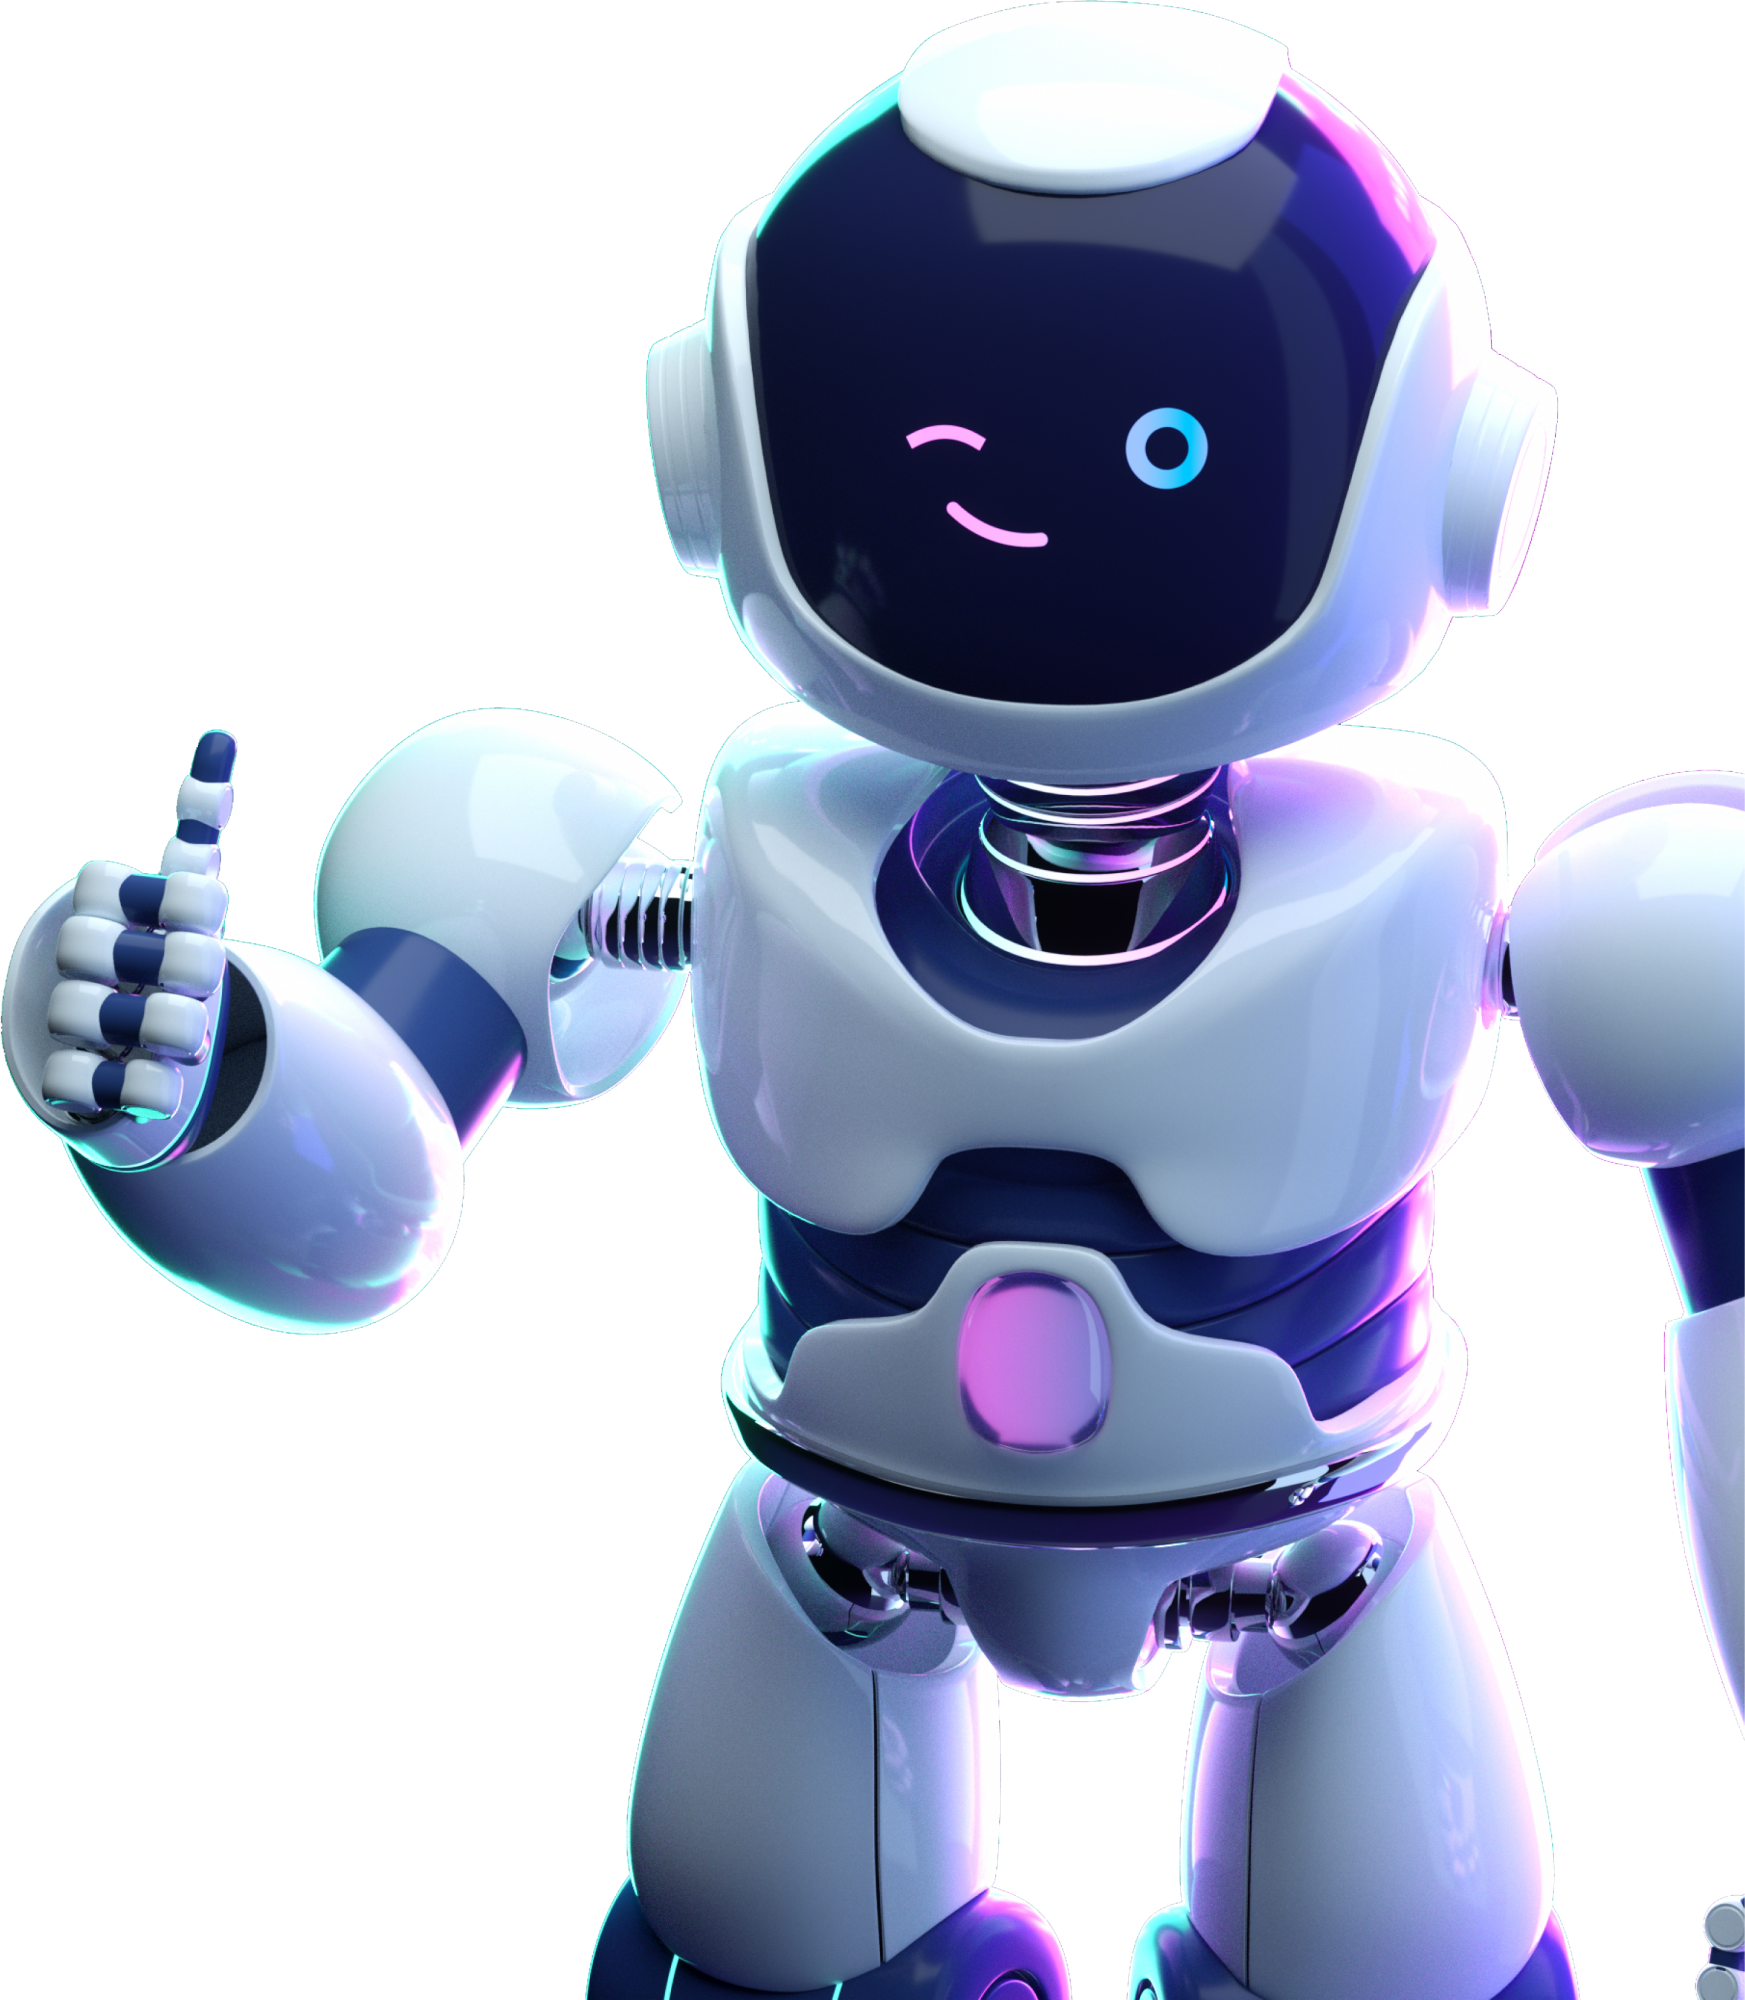 Jasper is not a real robot - this is the mascot of my favorite copywriting tool, Jasper.ai.